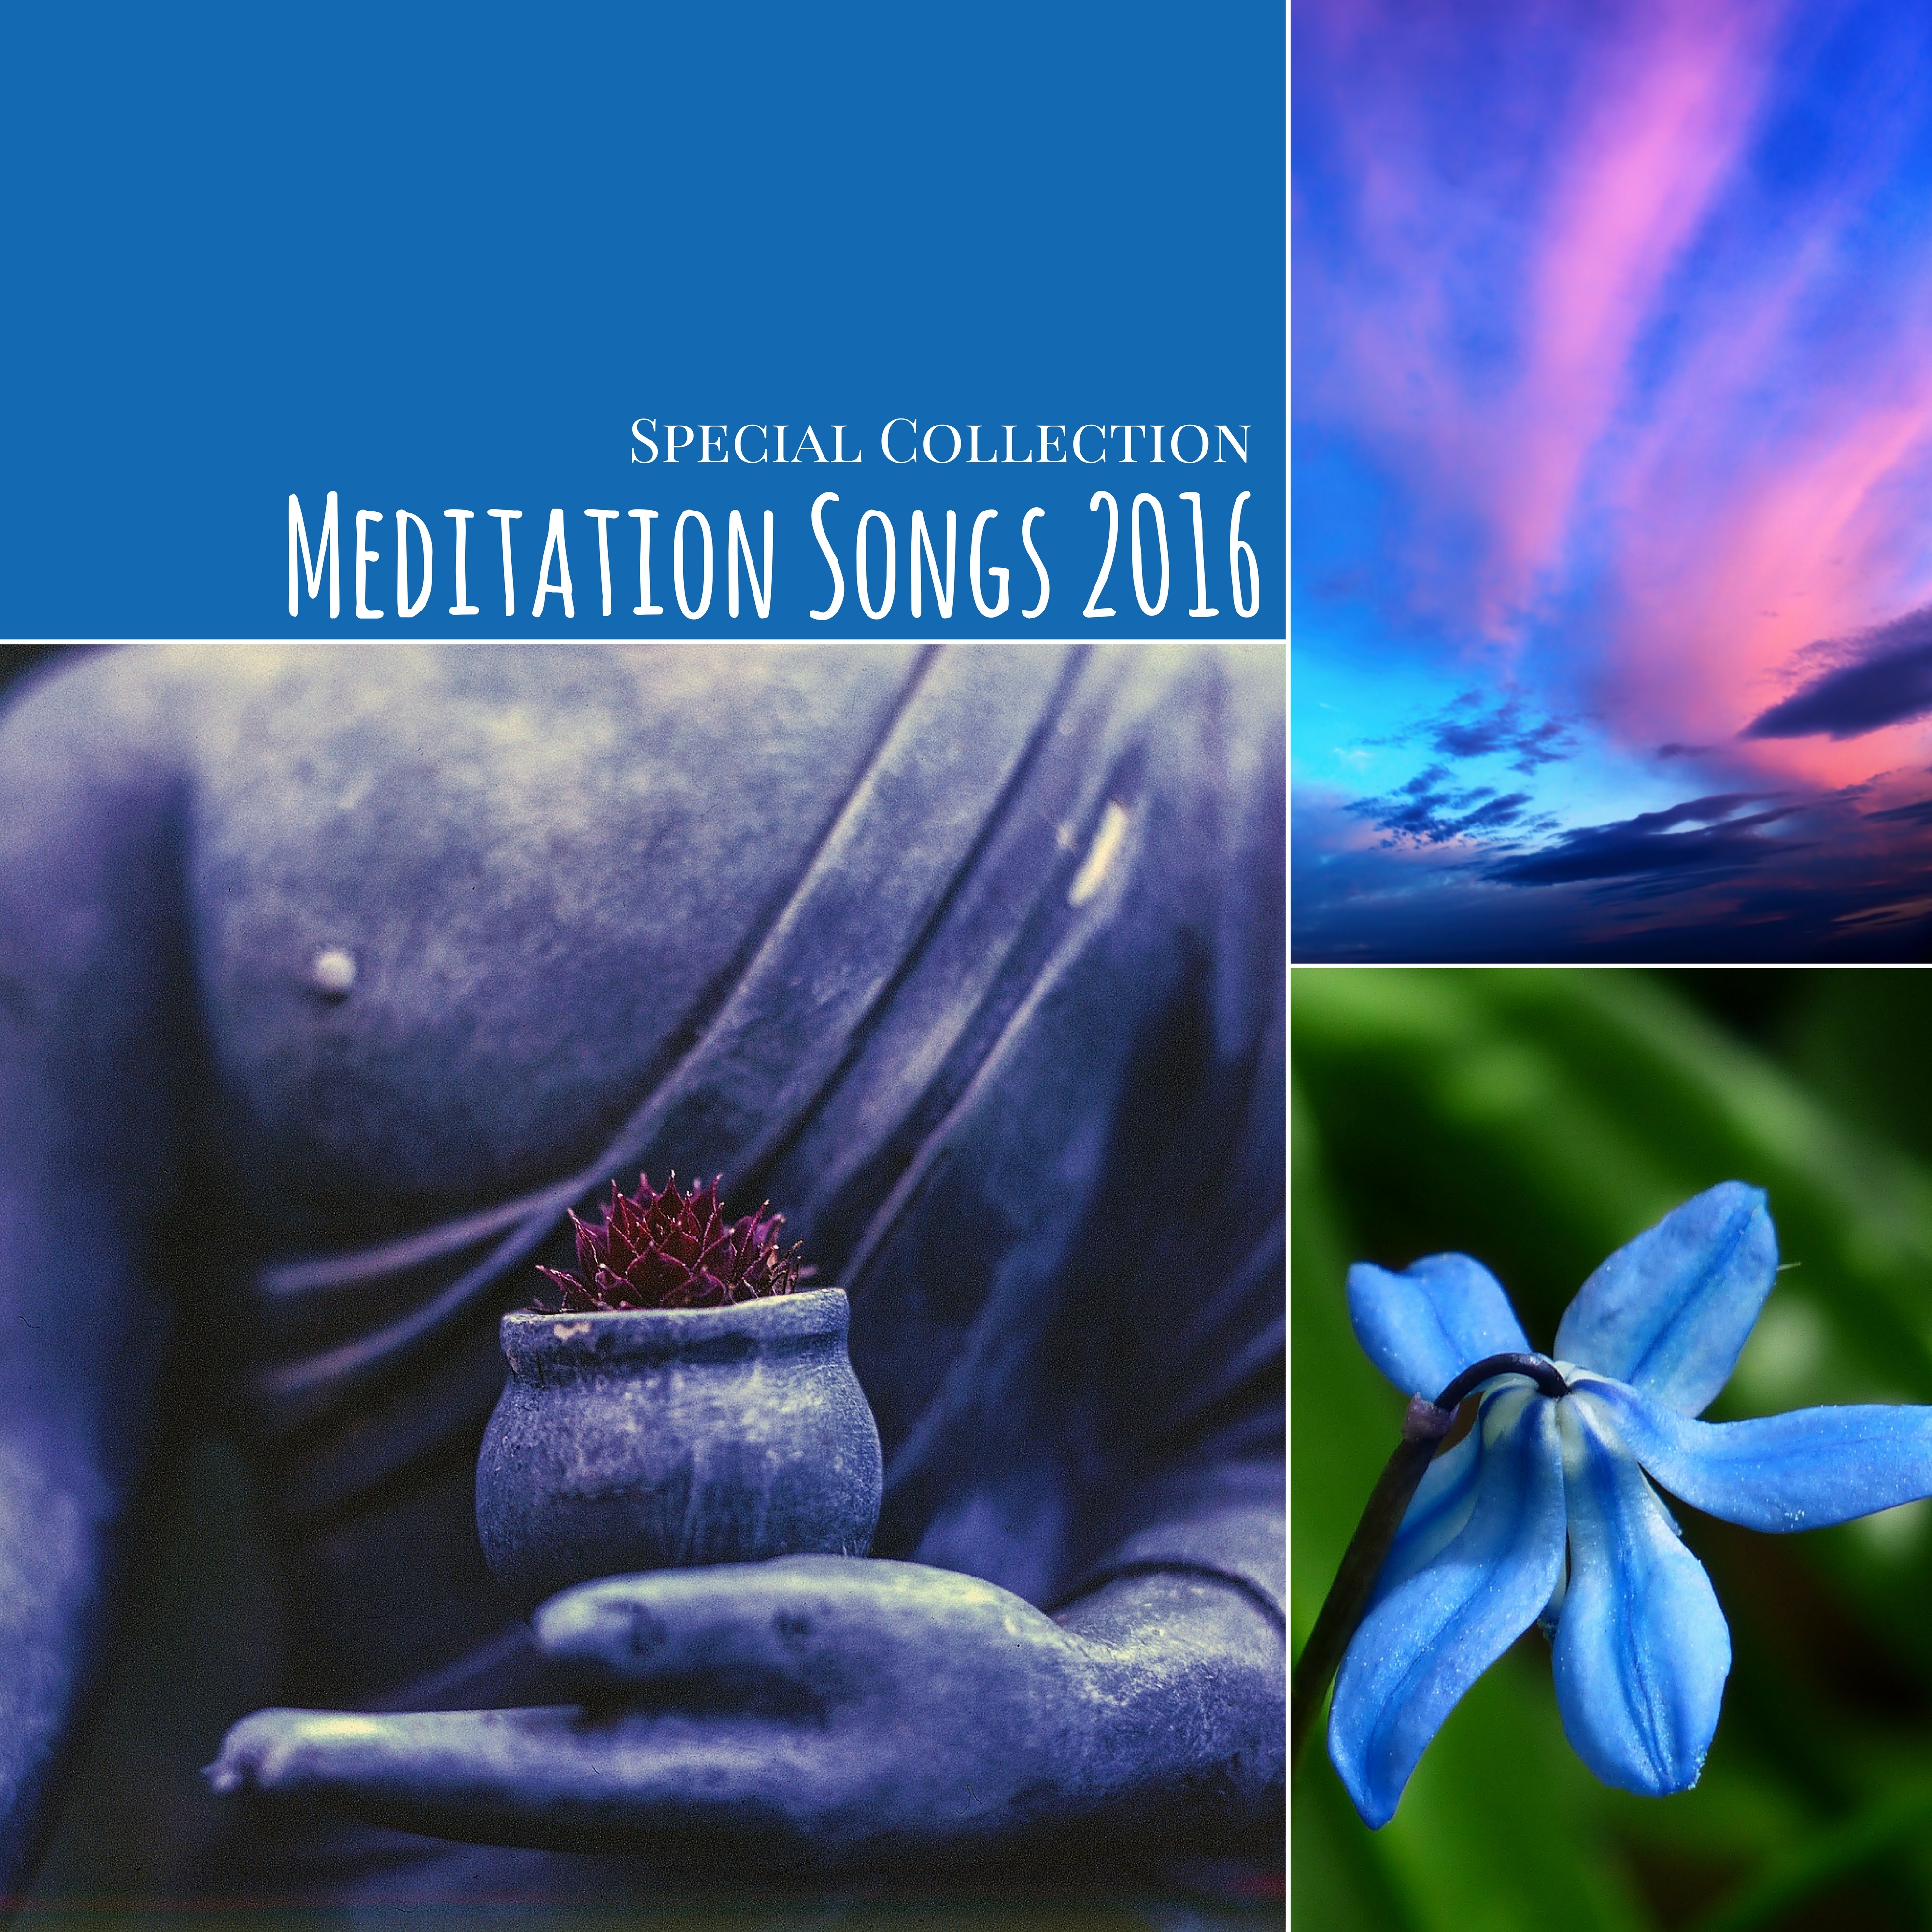 Meditation Songs 2016 - Special Collection of Relaxing Meditation Music for Yoga, Sleep, Study, Spa and Reiki Healing Therapy